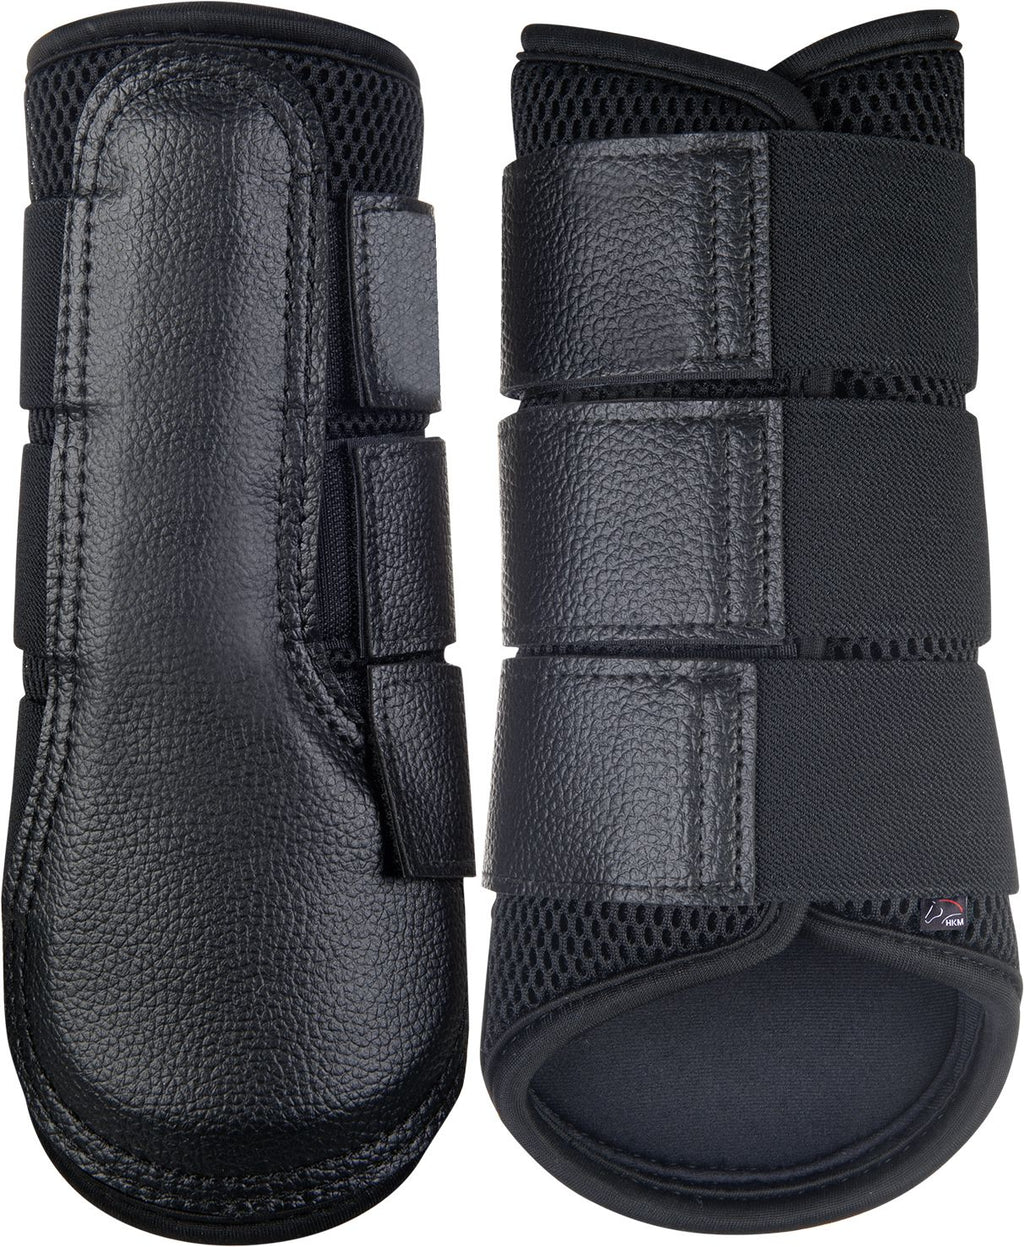 HKM Protection boots -Breath